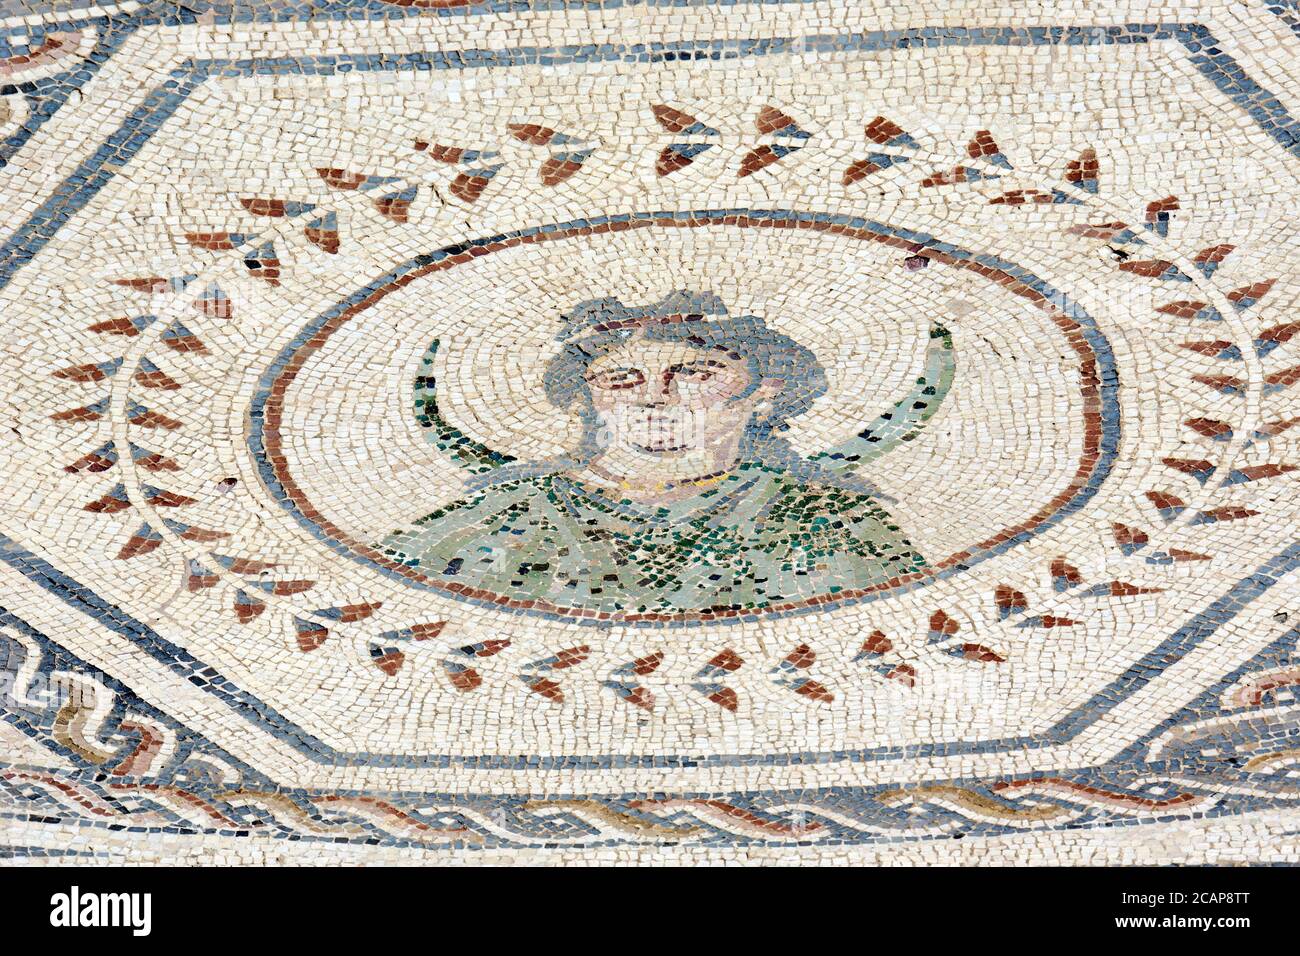 Spain, Andalusia, Seville province, Santiponce. Roman city of Italica. Founded in 206 BC by the Roman general Scipio. House of the Planetarium. Mosaic which represents the seven stars of the solar system known at that time by the Romans. Each planet is personified by a god, in turn, symbolises a day of the week. Detail of Luna or Selene, Moon goddess (Monday). Depicted with long hair and large crescent moon. Stock Photo